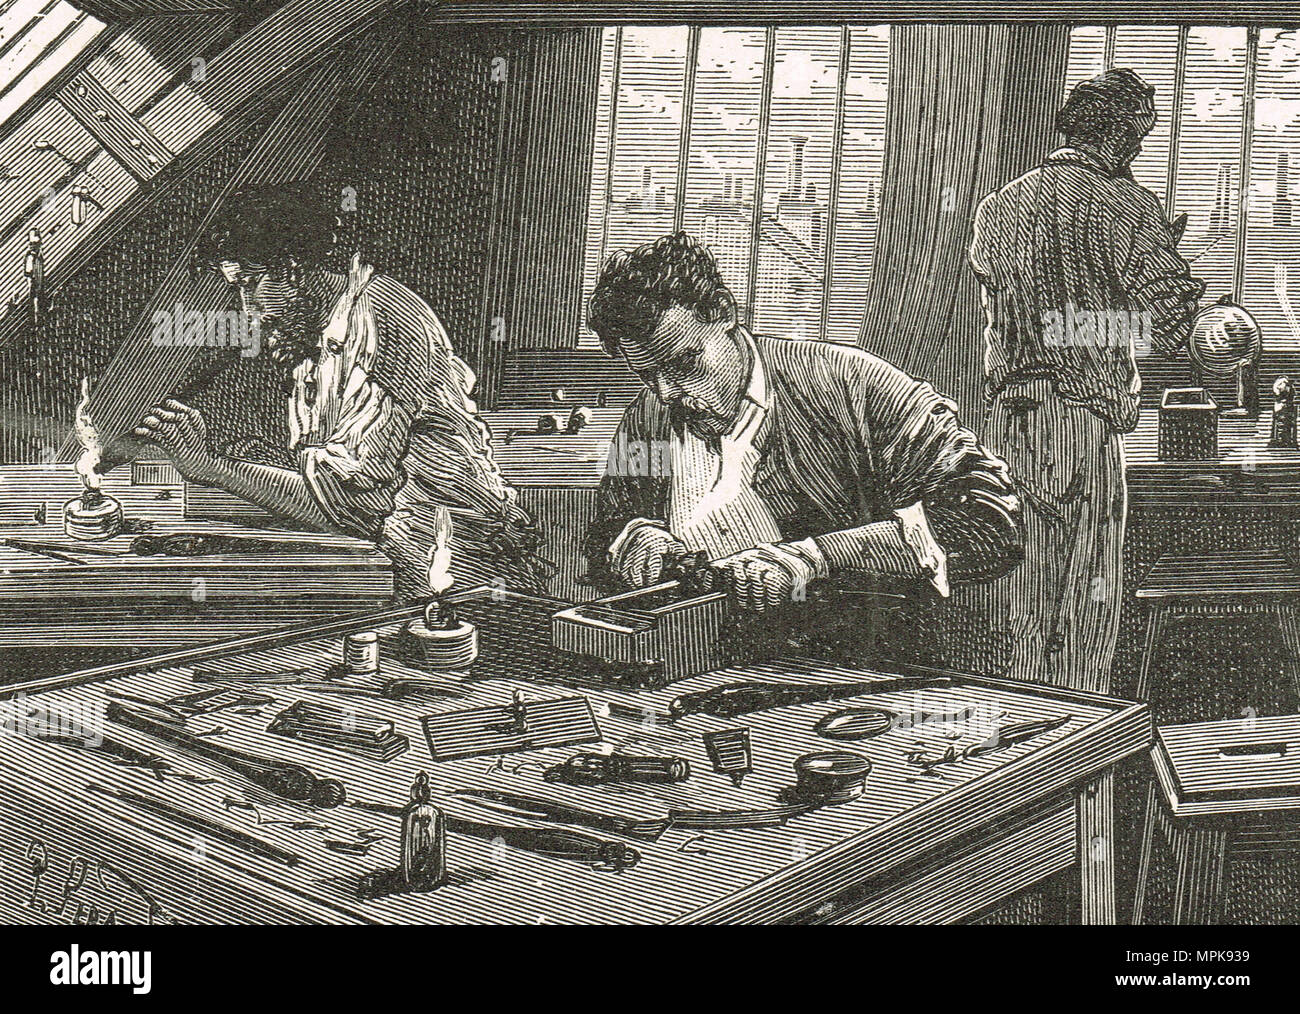 Diamond cutting  by hand in the 19th century Stock Photo